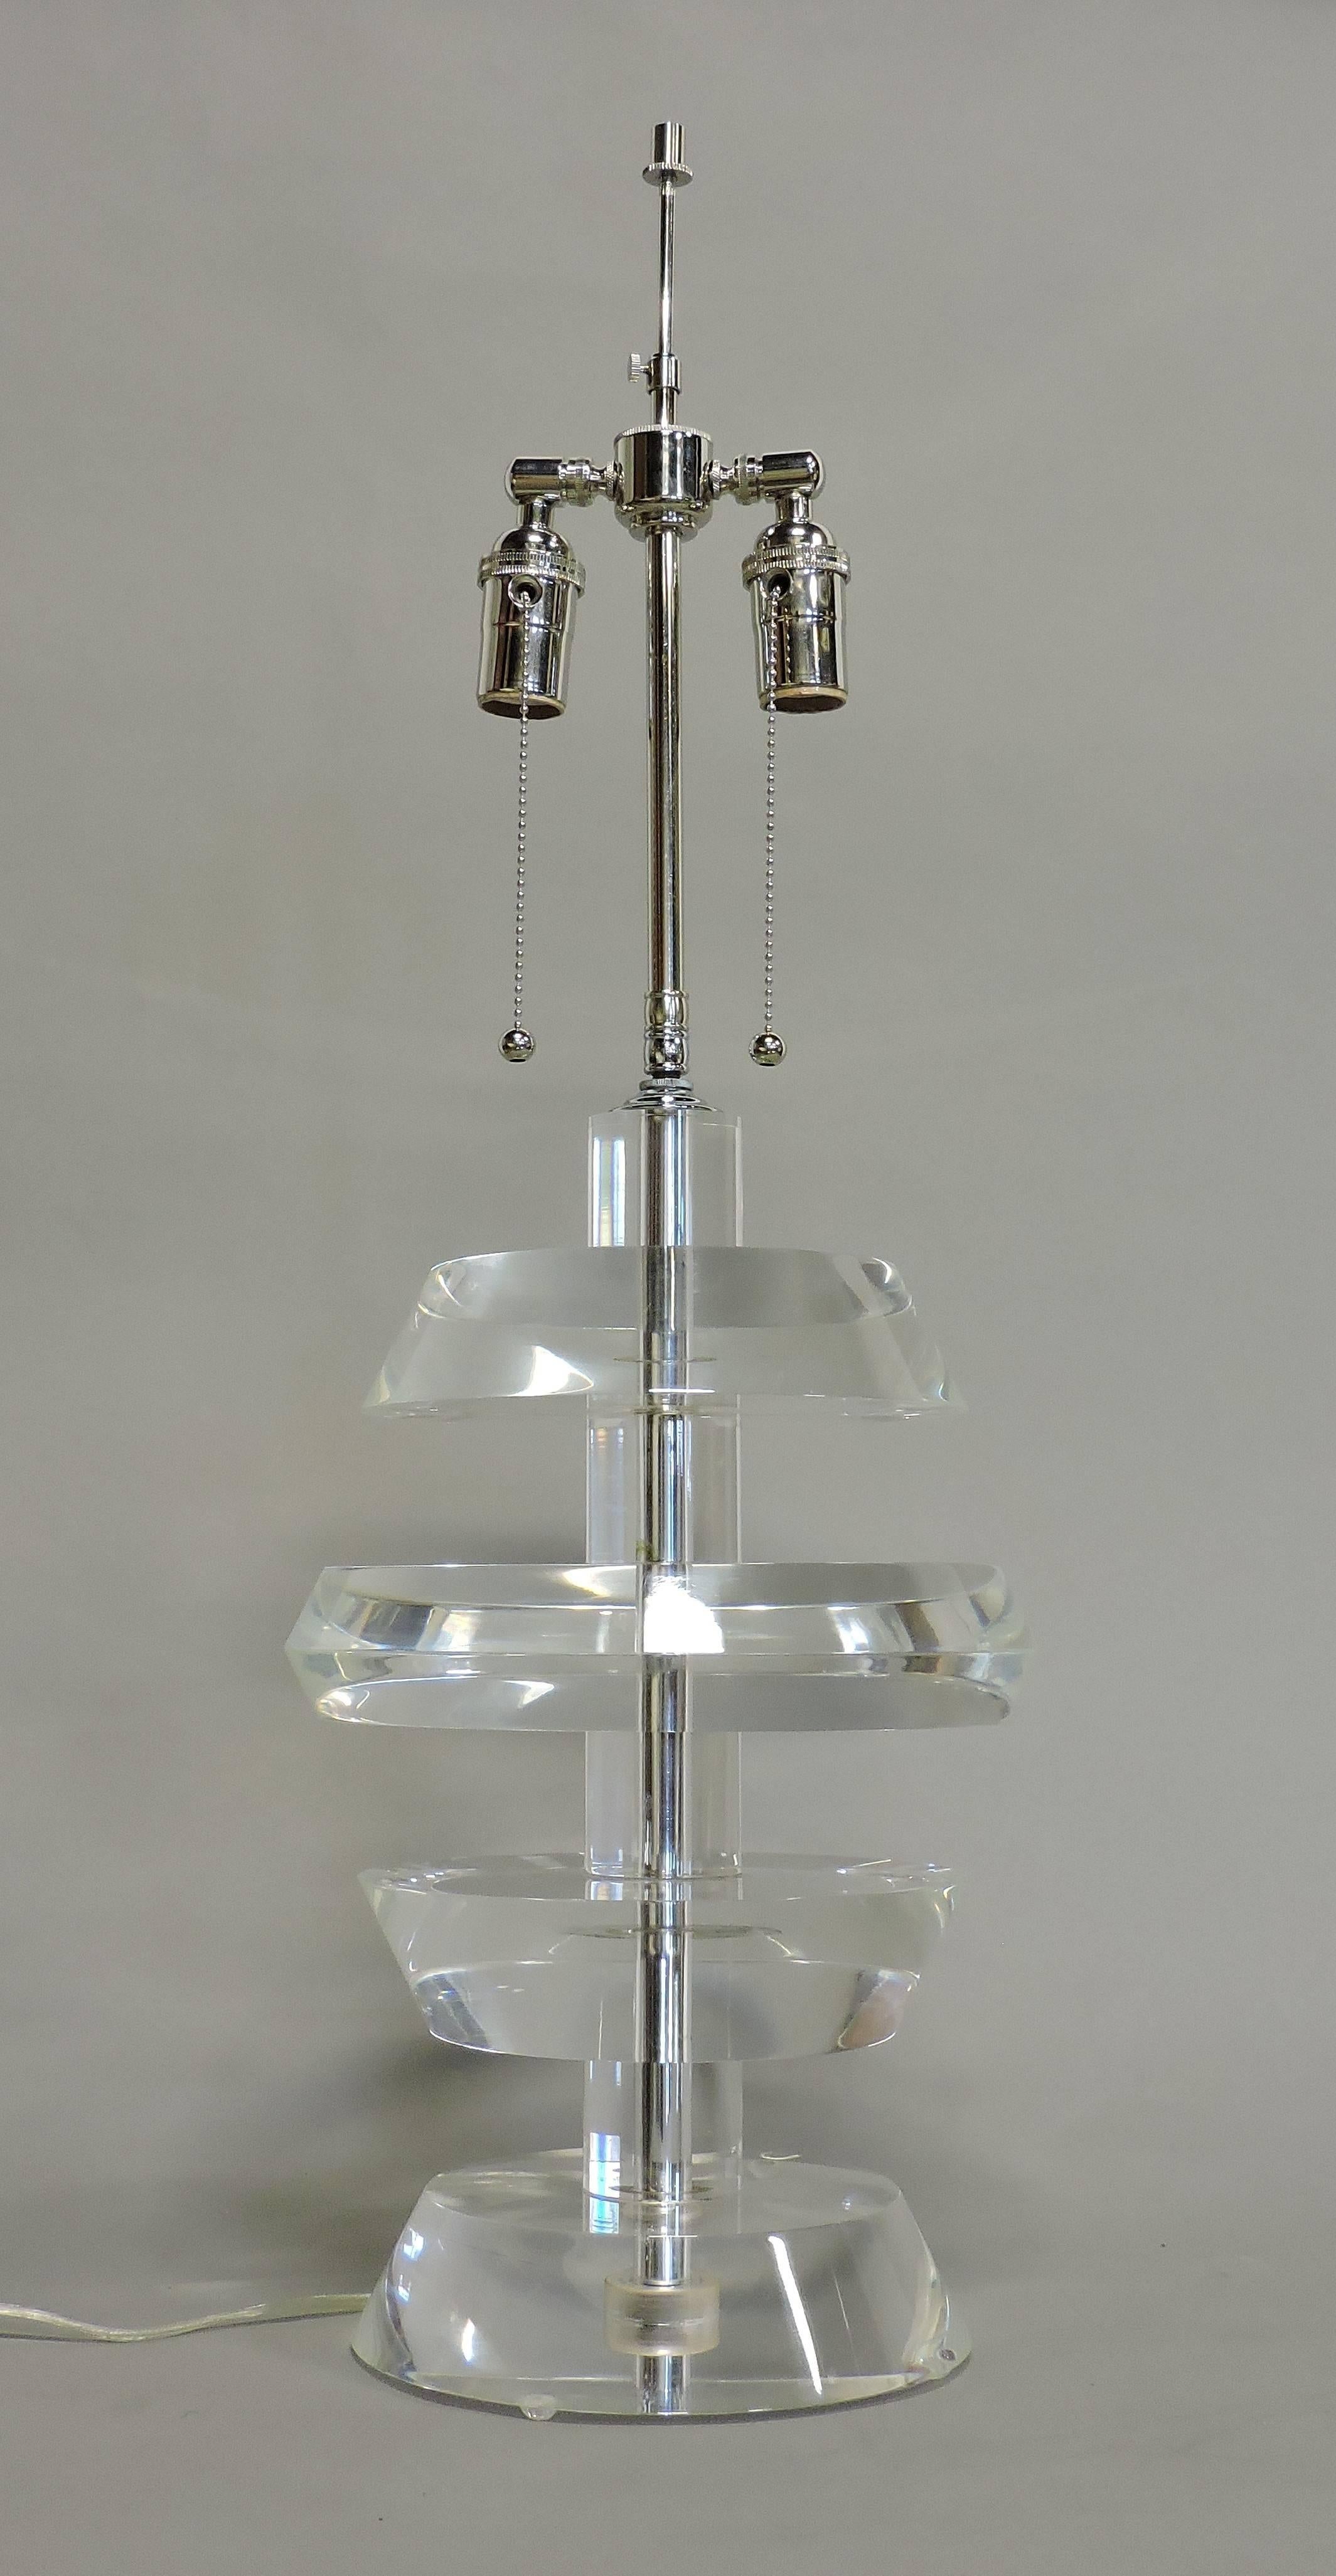 Beautiful and heavy high quality Lucite lamp in the style of Karl Springer. This lamp has thick circular discs of stacked clear Lucite, a double light socket, and all new wiring. The shade is not included.